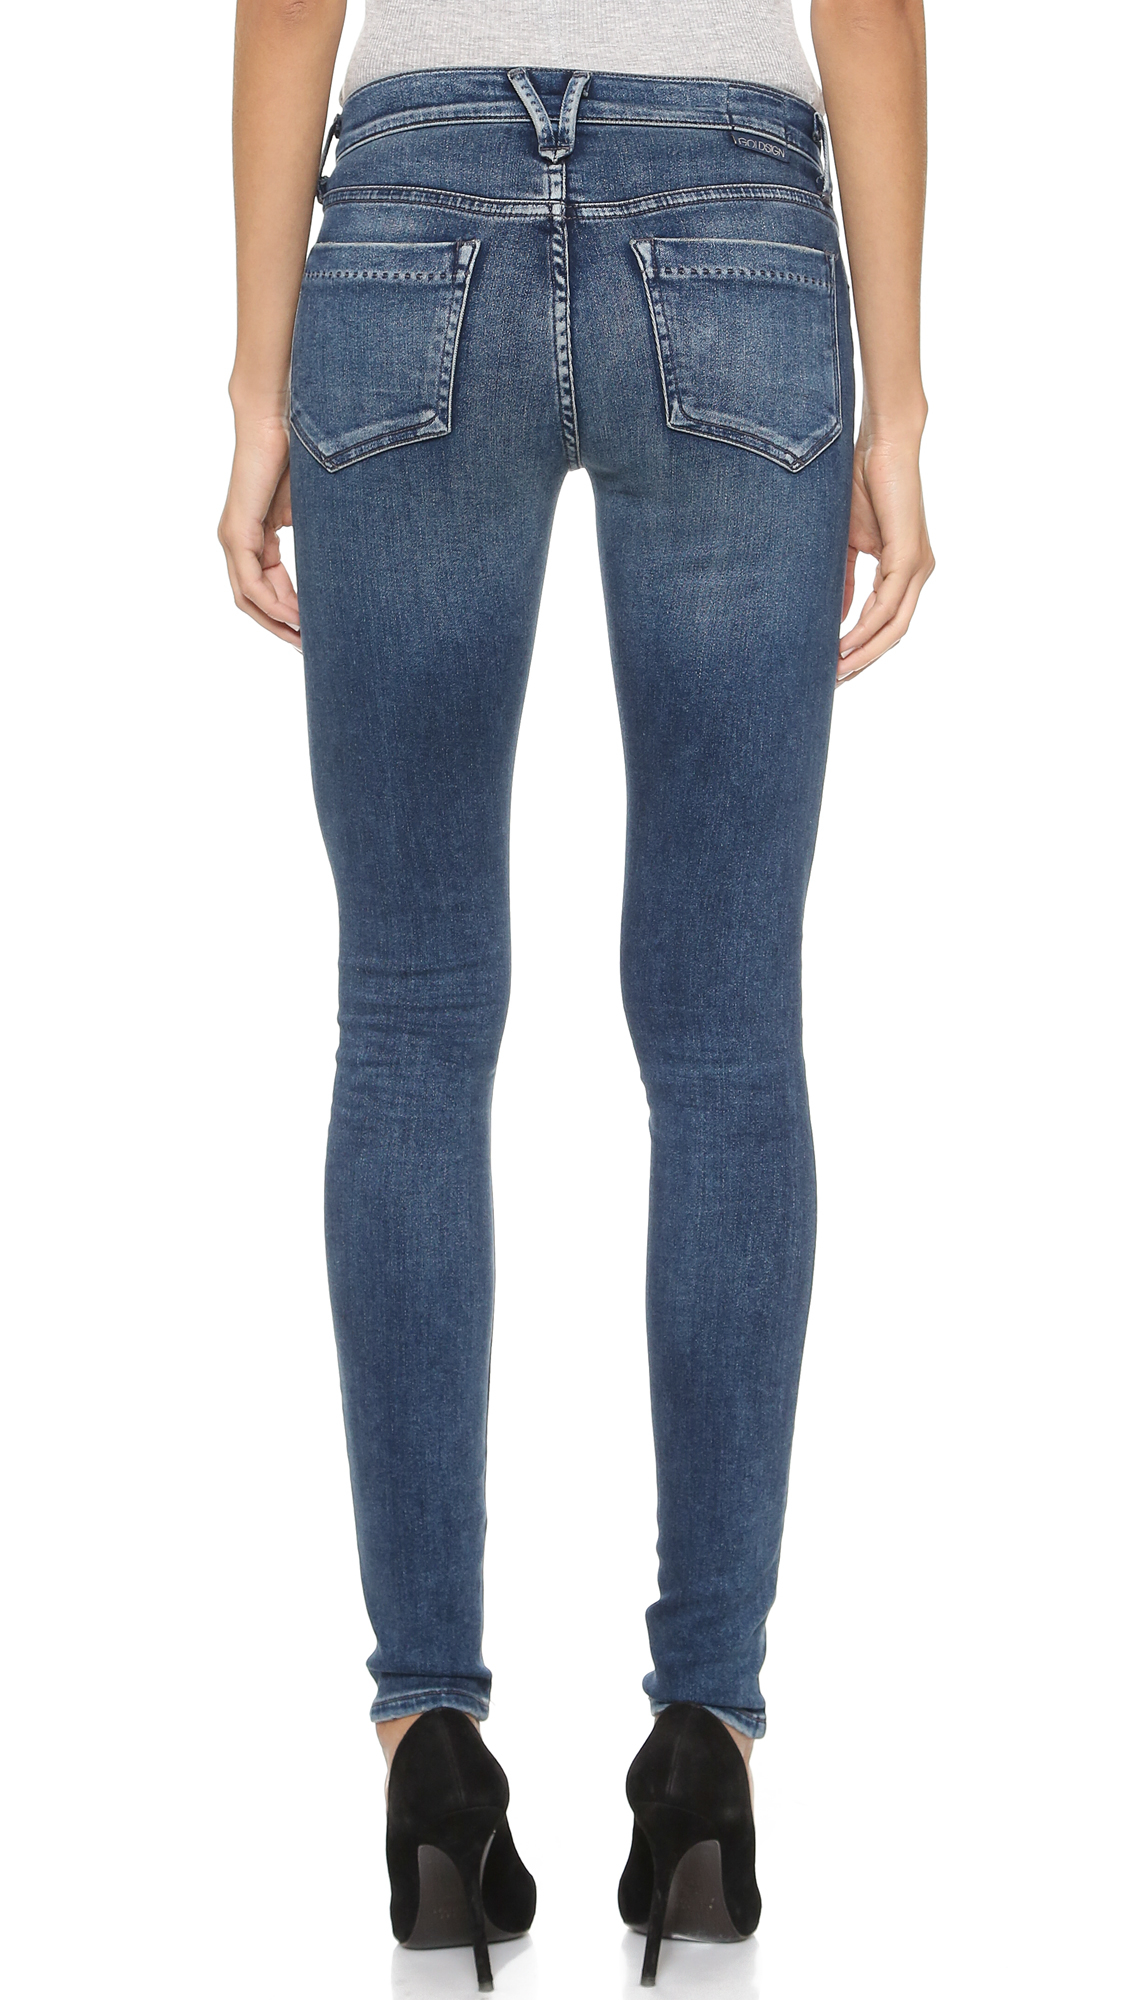 Lyst - Goldsign Lure Skinny Jeans in Blue